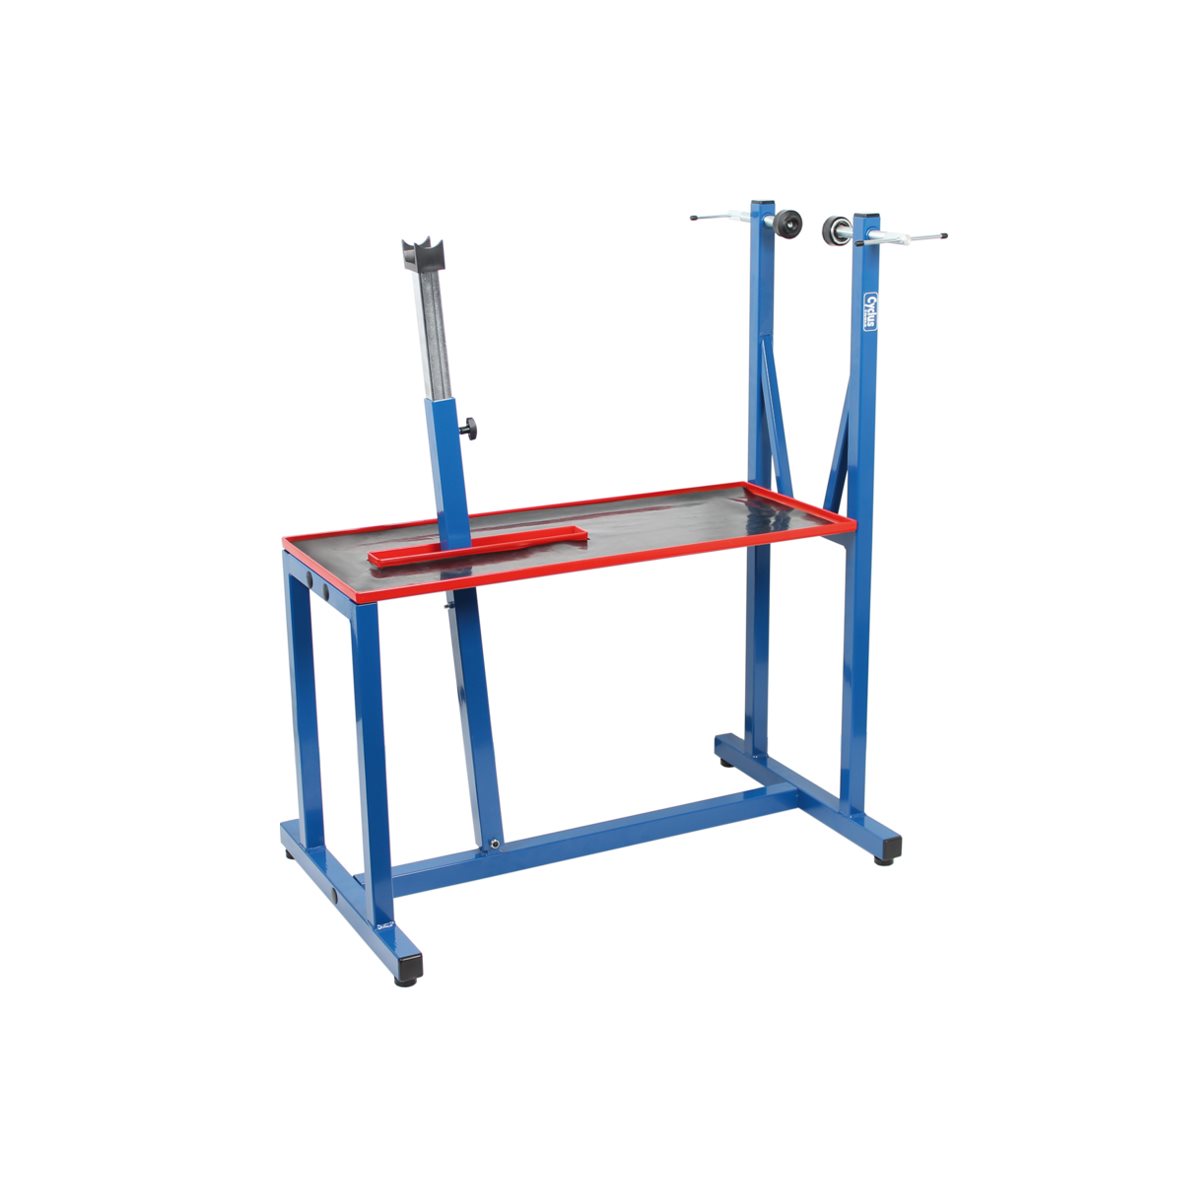 Workshop repair stand up to 29'' with plastic adapters